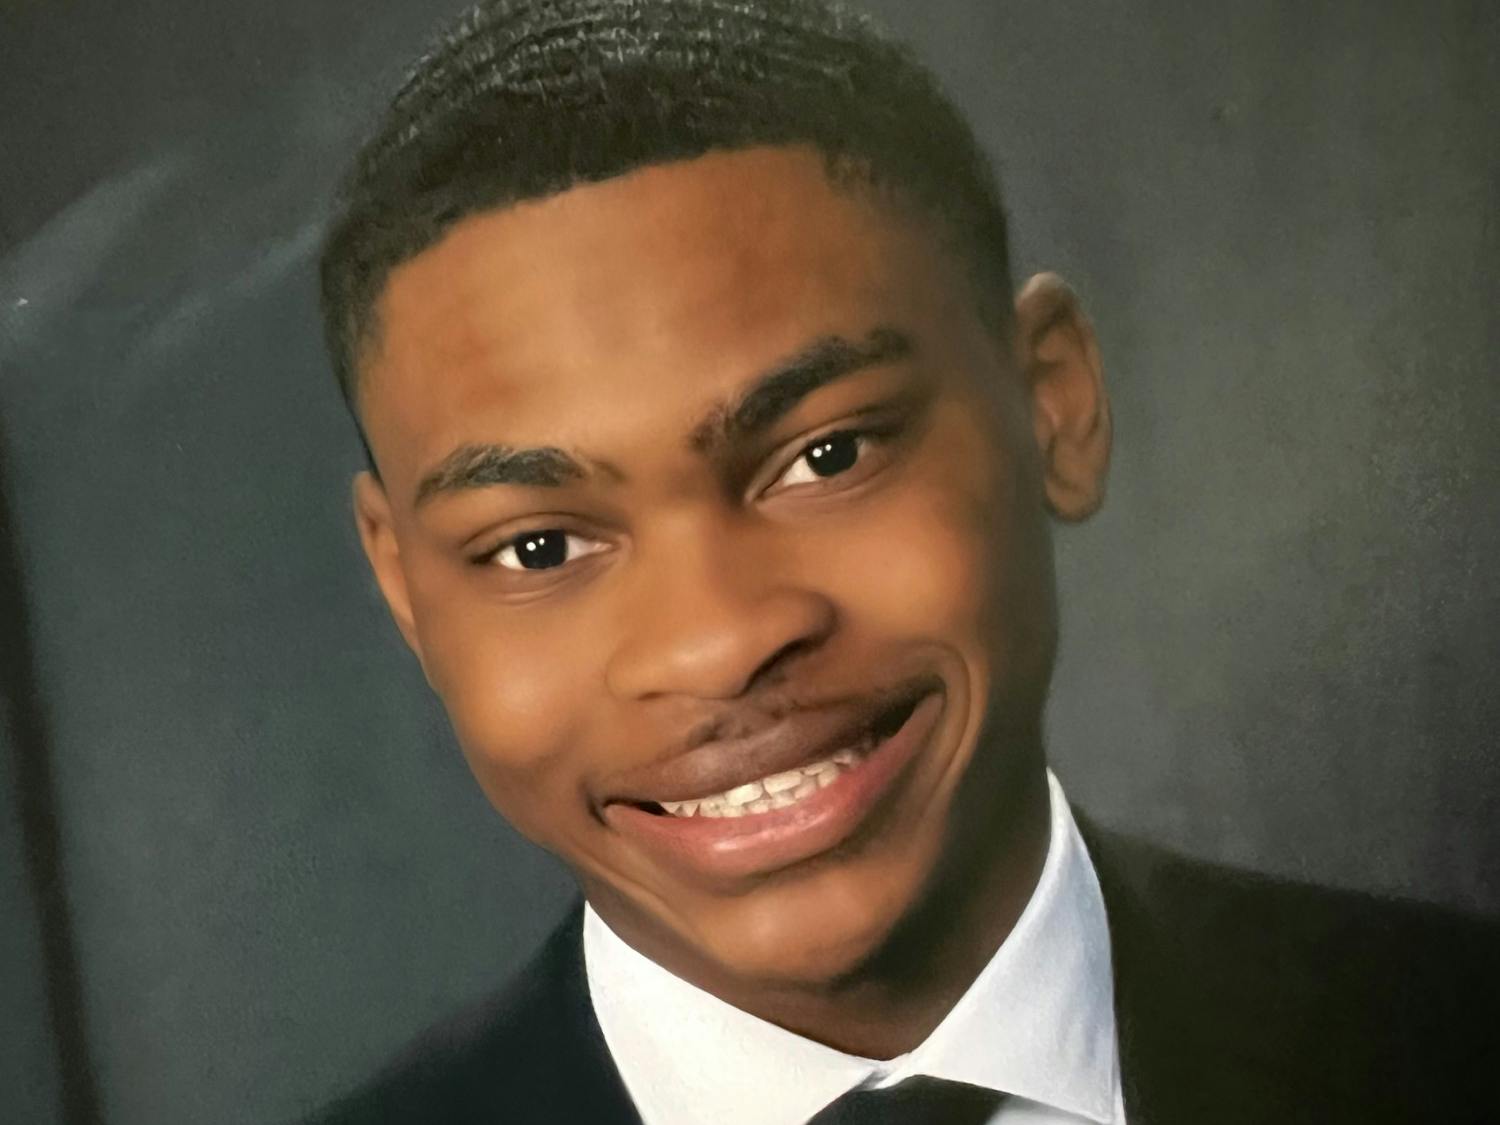 Erie County District Attorney John Flynn announced Friday that a grand jury would press no charges in connection with the death of Tyler Lewis.&nbsp;